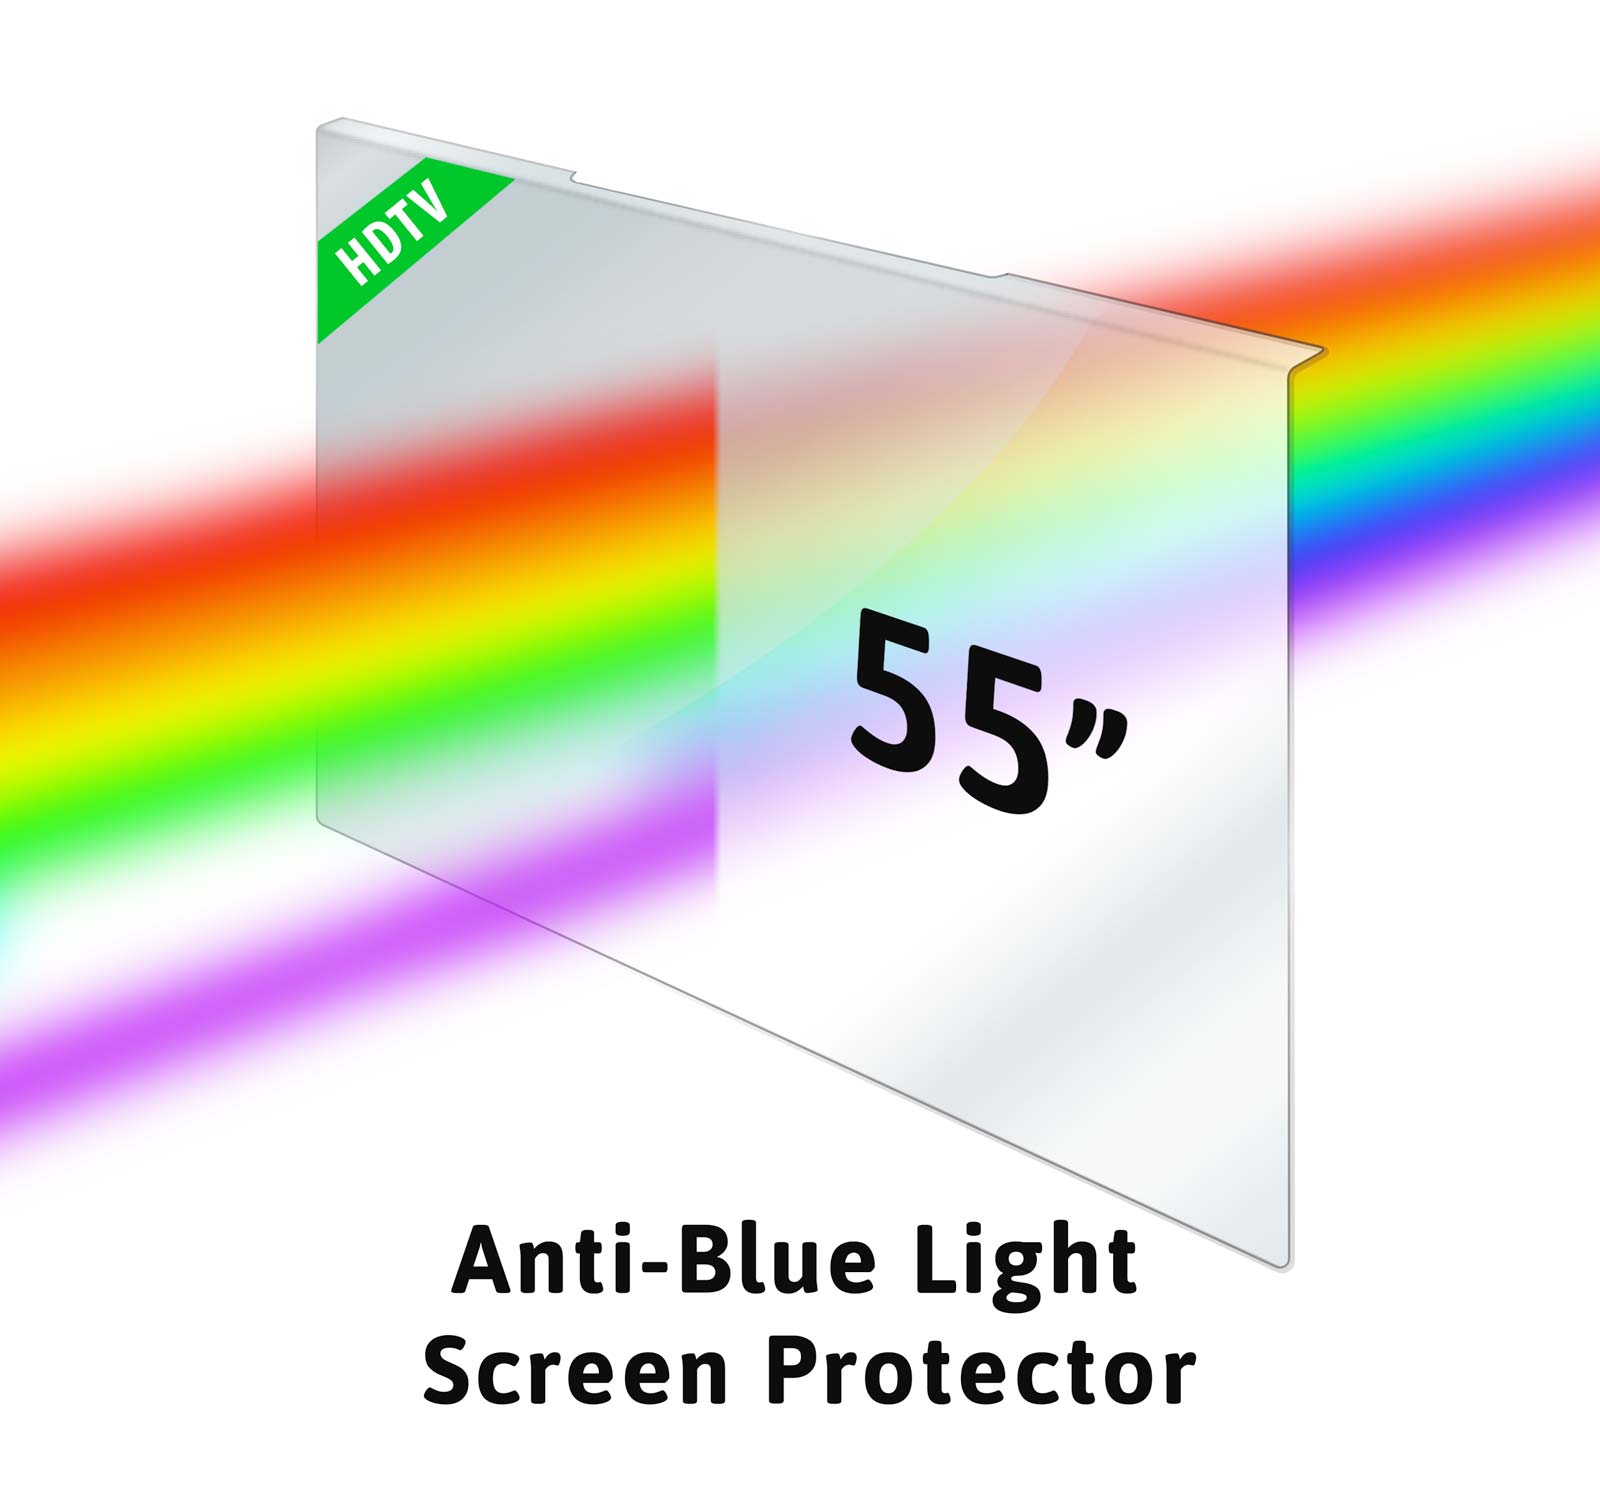 Anti-Blue Light TV Screen Protector for Most 55" TVs - Clear